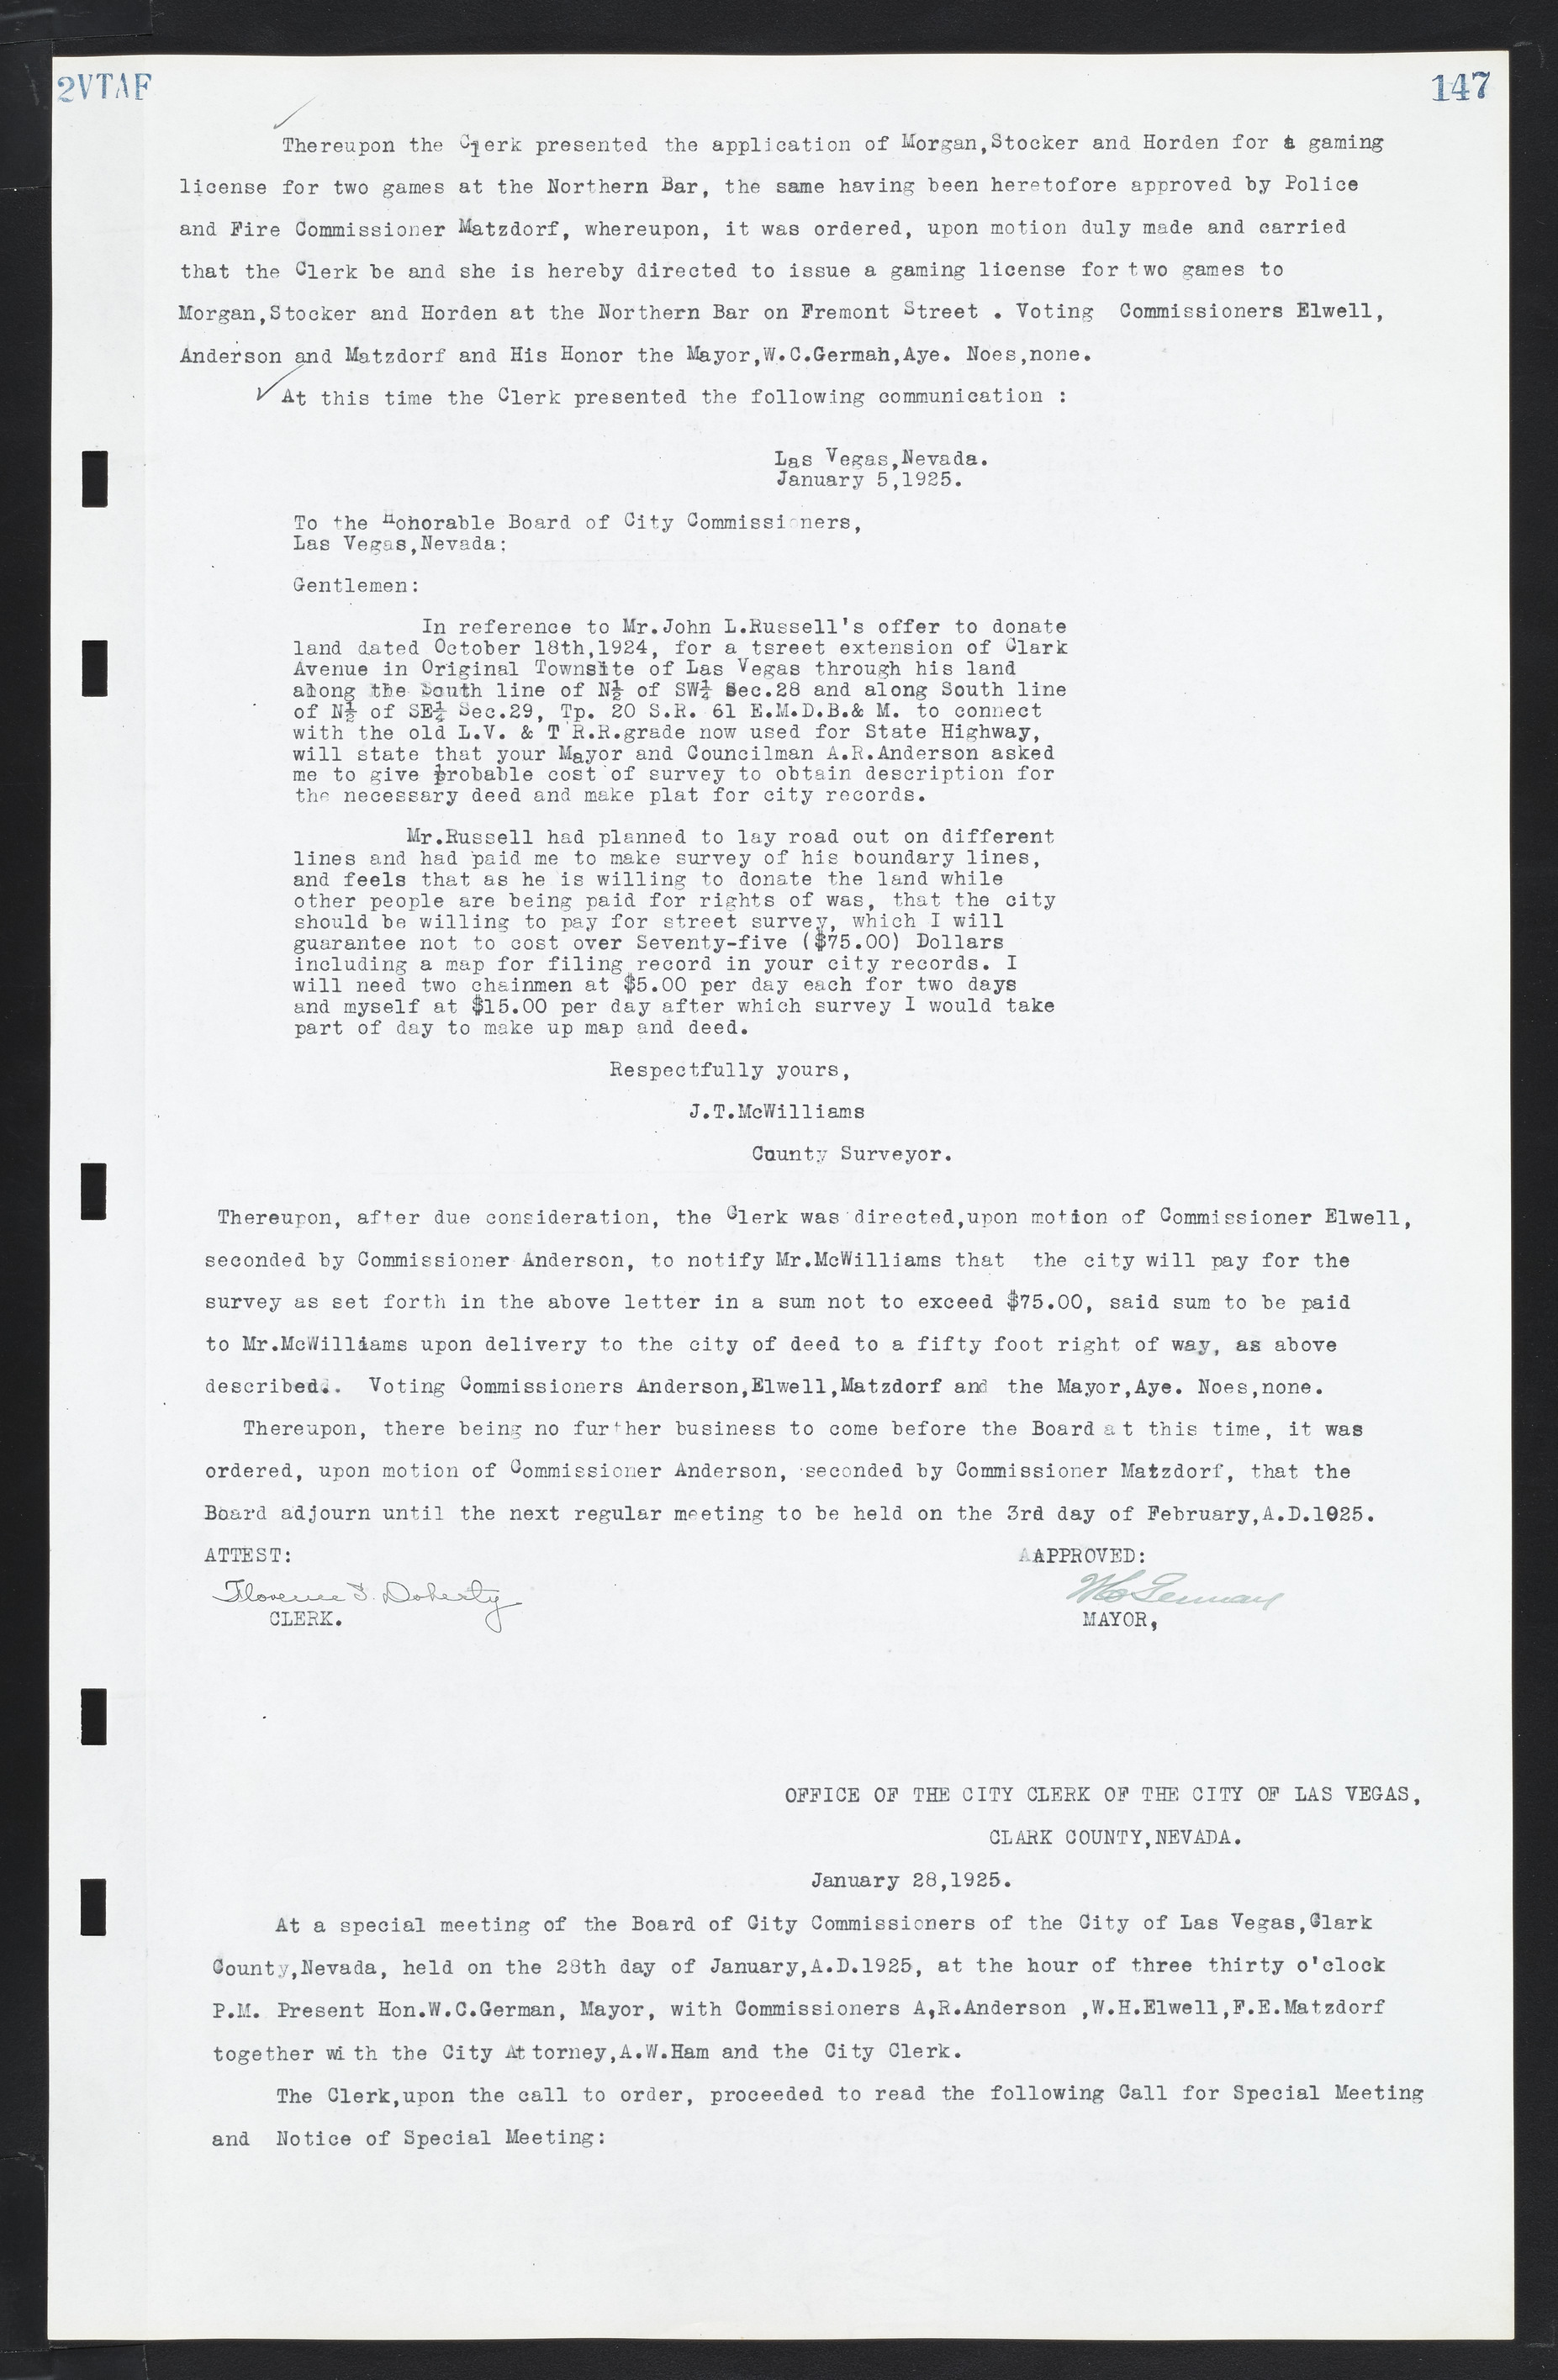 Las Vegas City Commission Minutes, March 1, 1922 to May 10, 1929, lvc000002-154